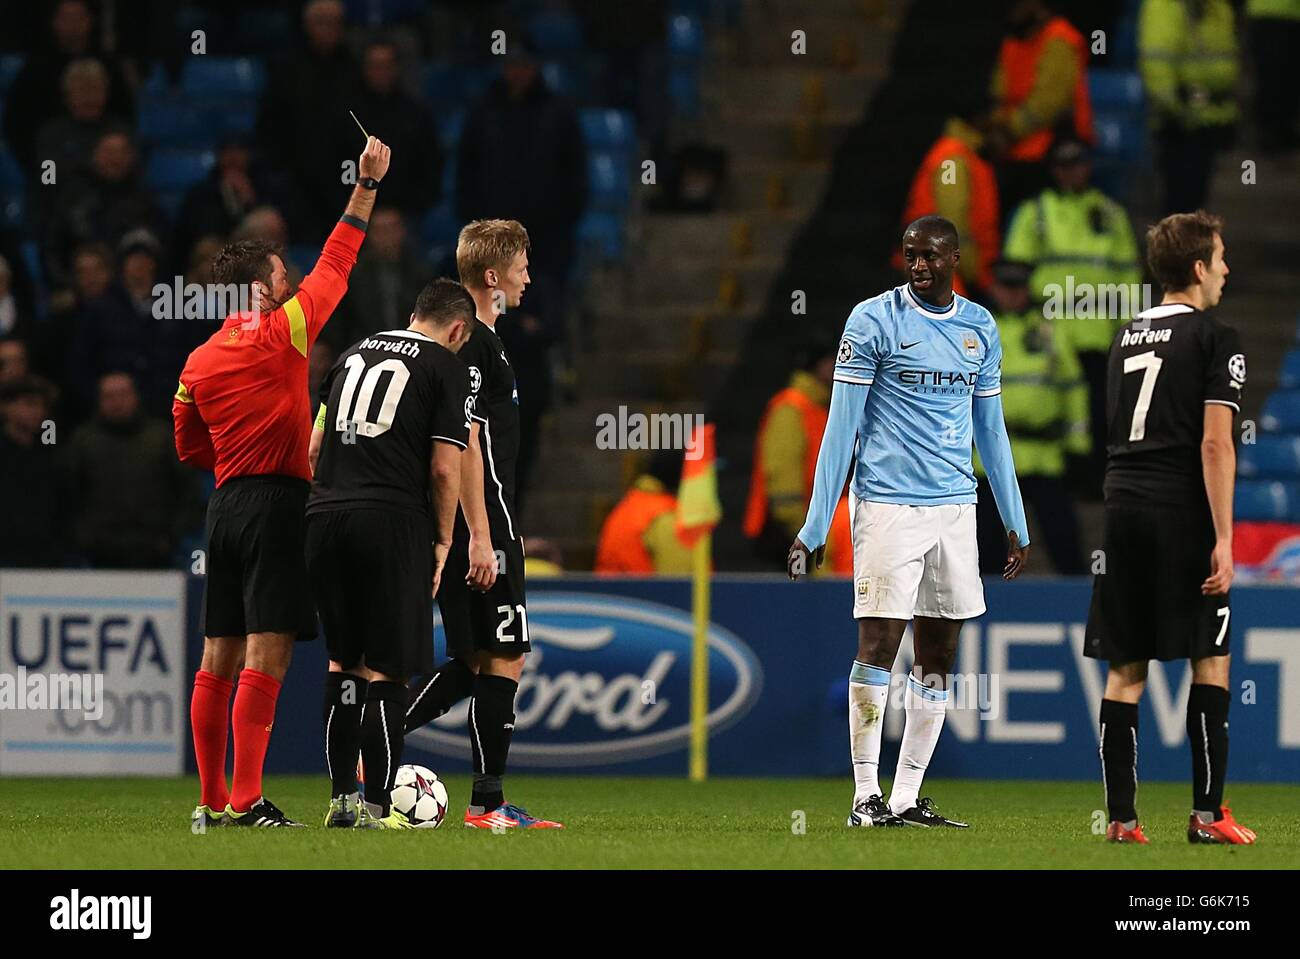 Manchester City's Yaya Toure (right) is shown the yellow card by referee Firat Aydinus meaning he is suspended for the next match Stock Photo